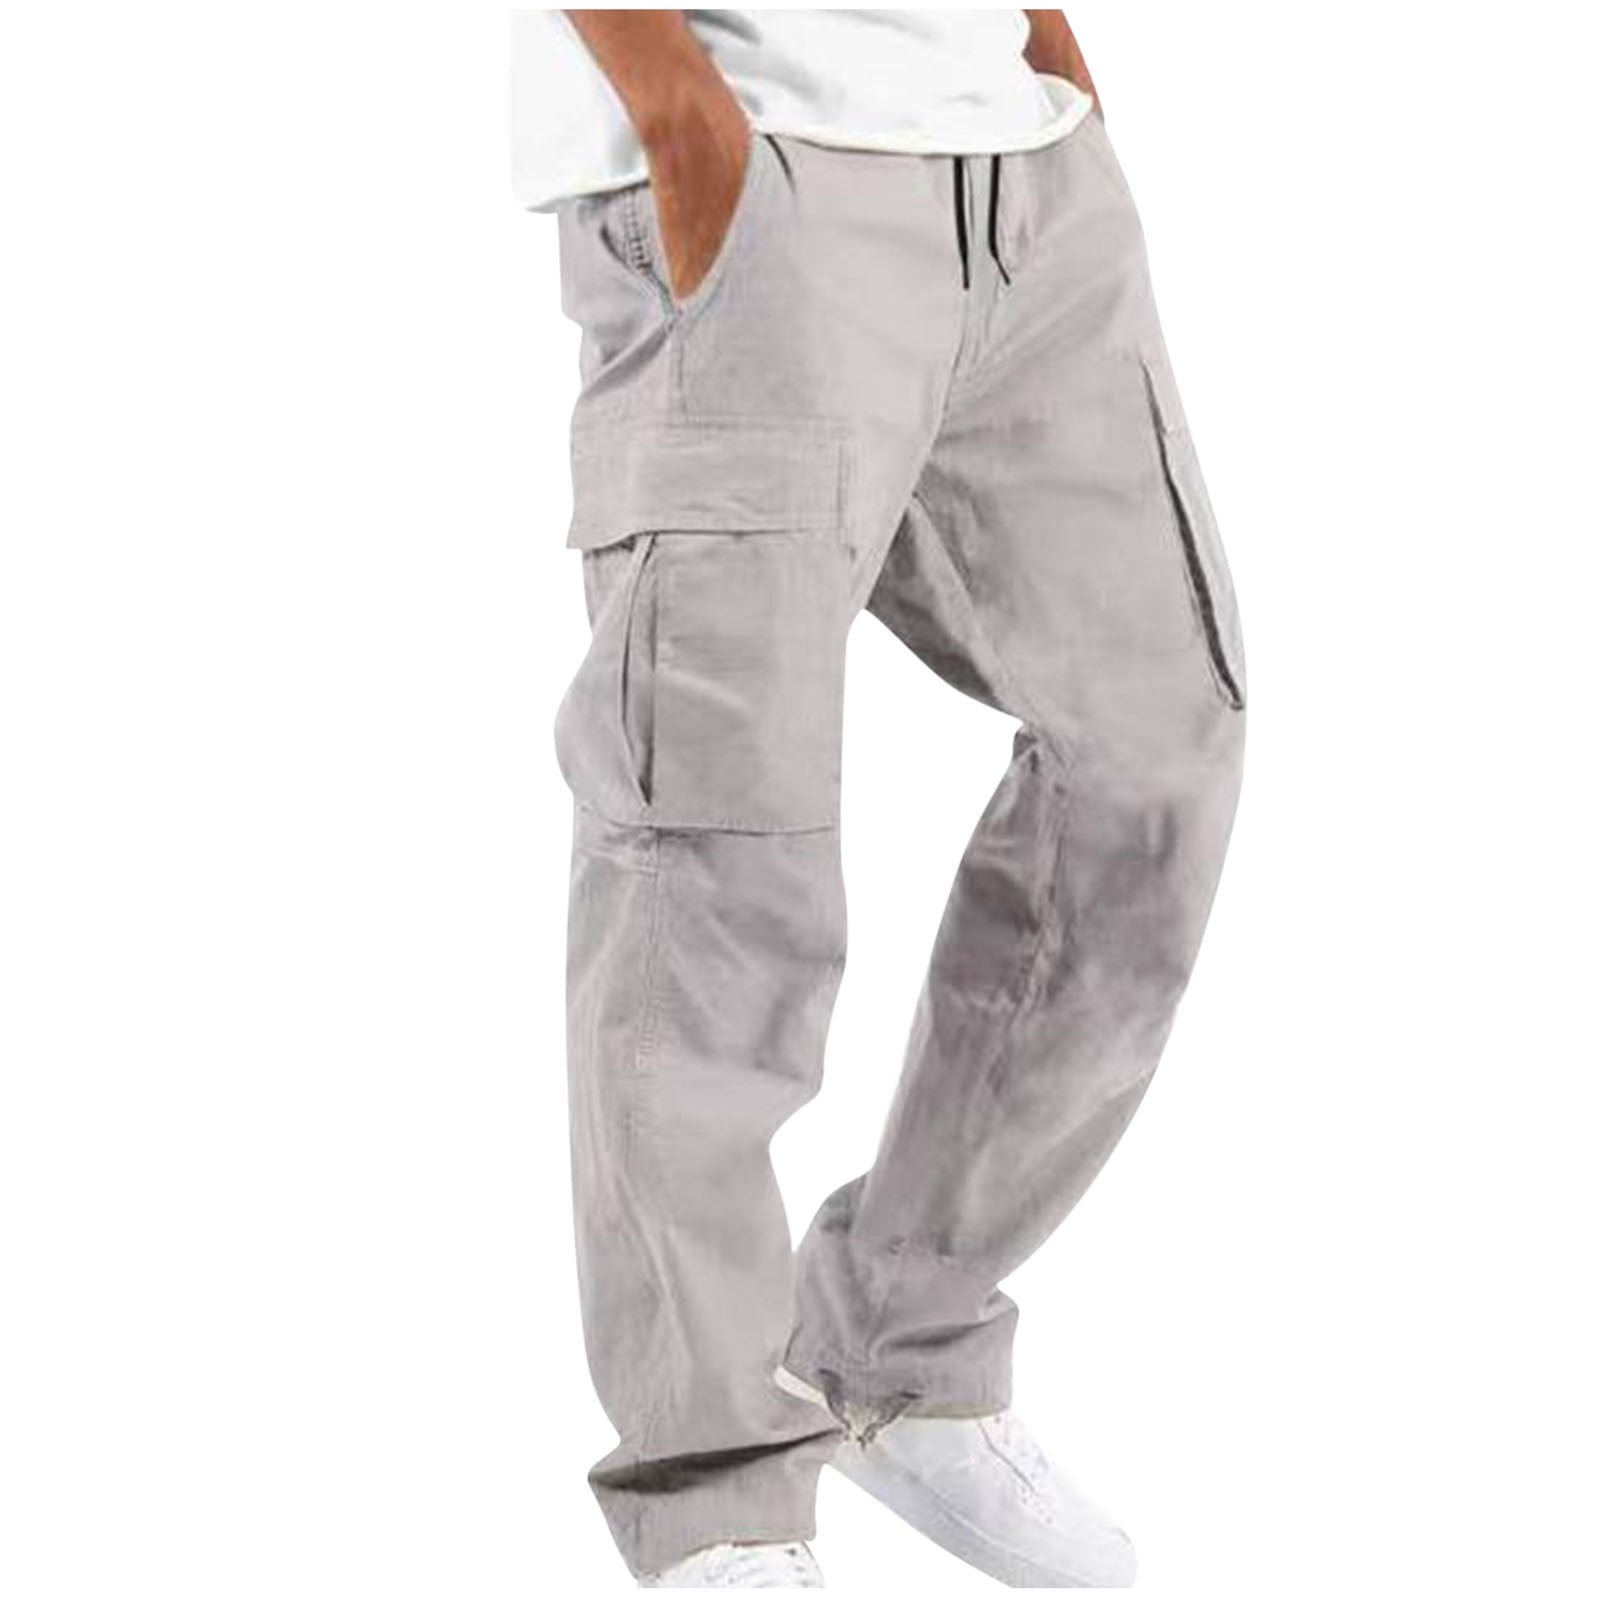 Mens Baggy Cargo Pants Casual Lightweight Hiking Fishing Trousers Drawstring  Outdoor Relaxed Fit Slacks Cargo Pants 